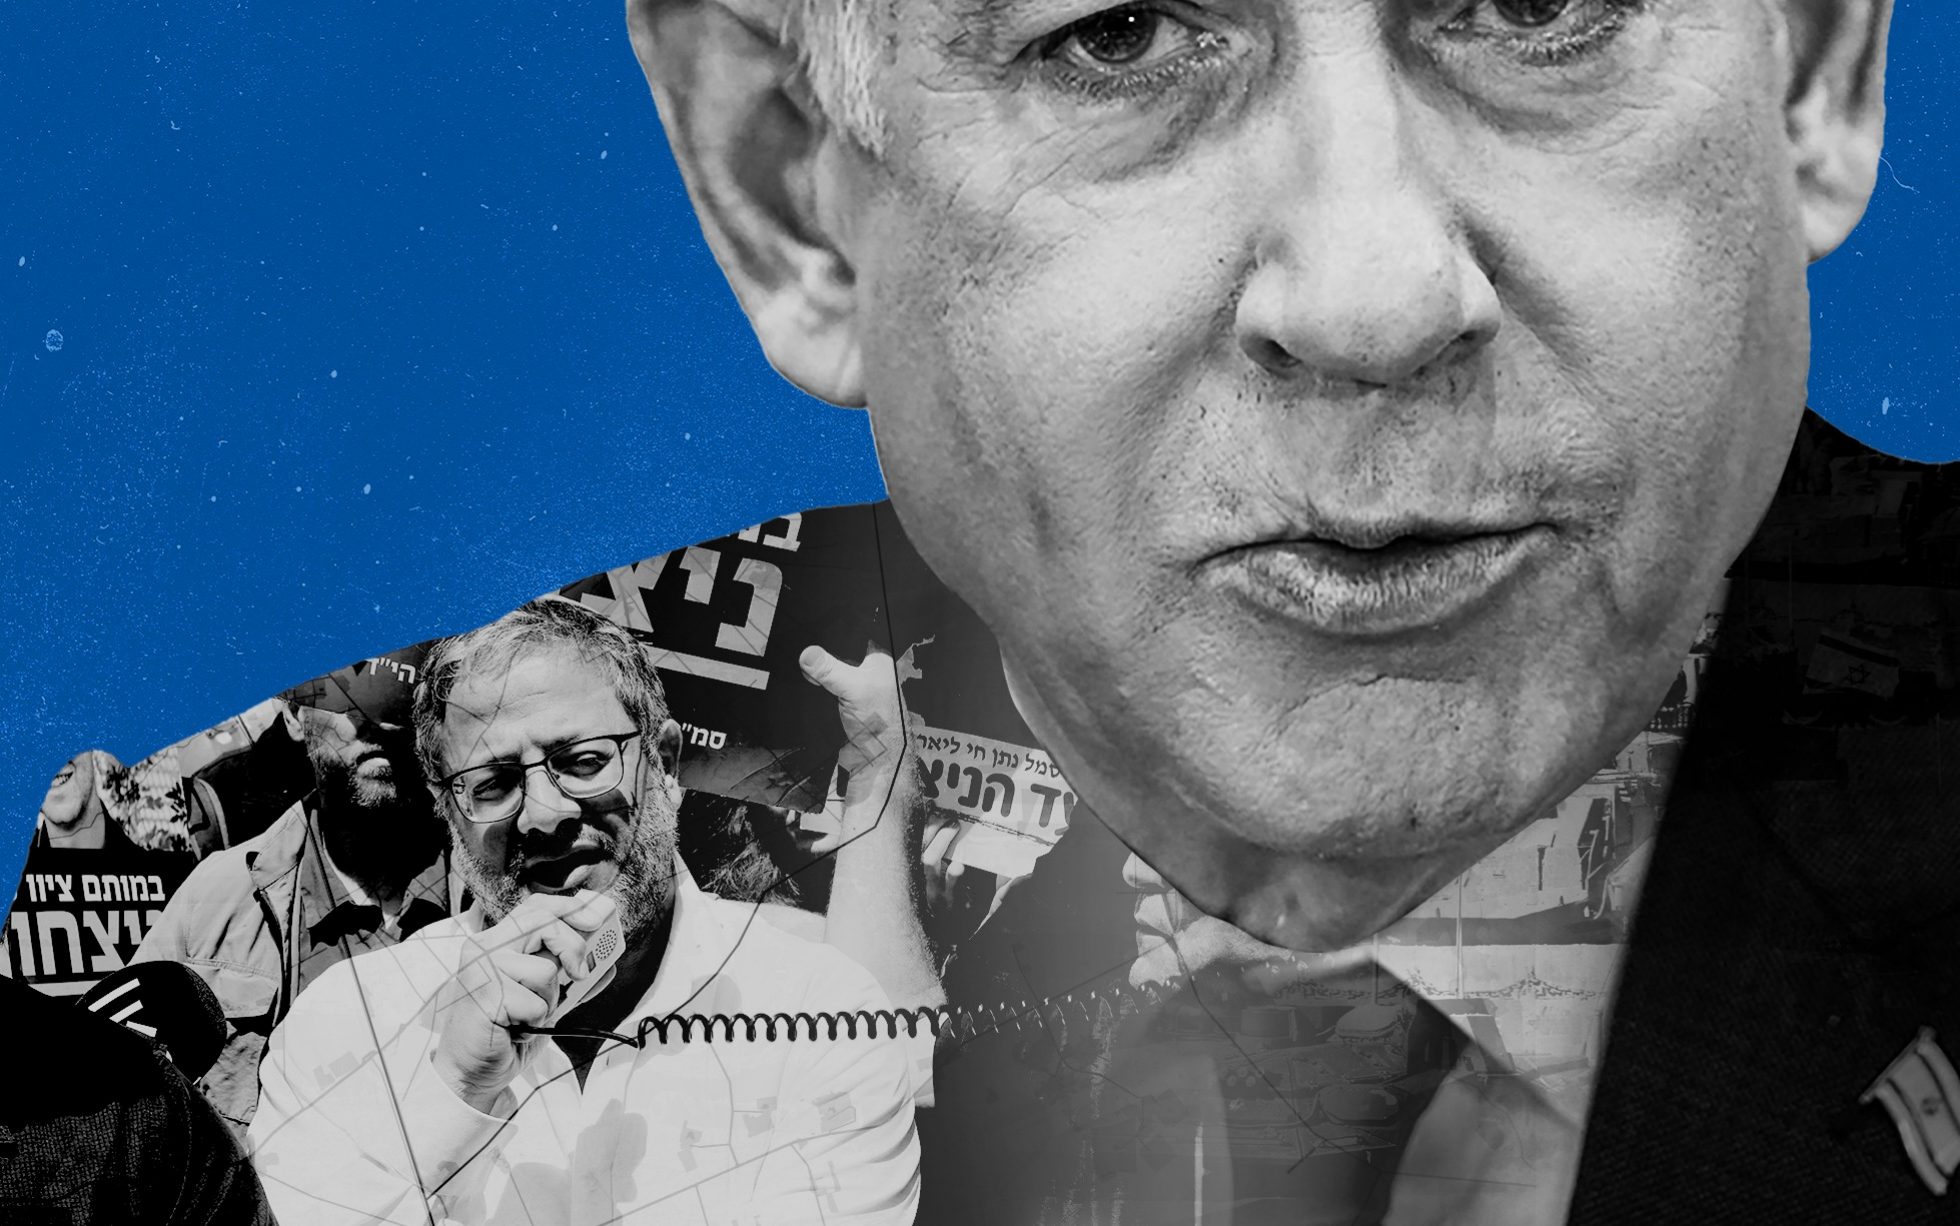 netanyahu denies putting his political survival above peace. the evidence suggests he might